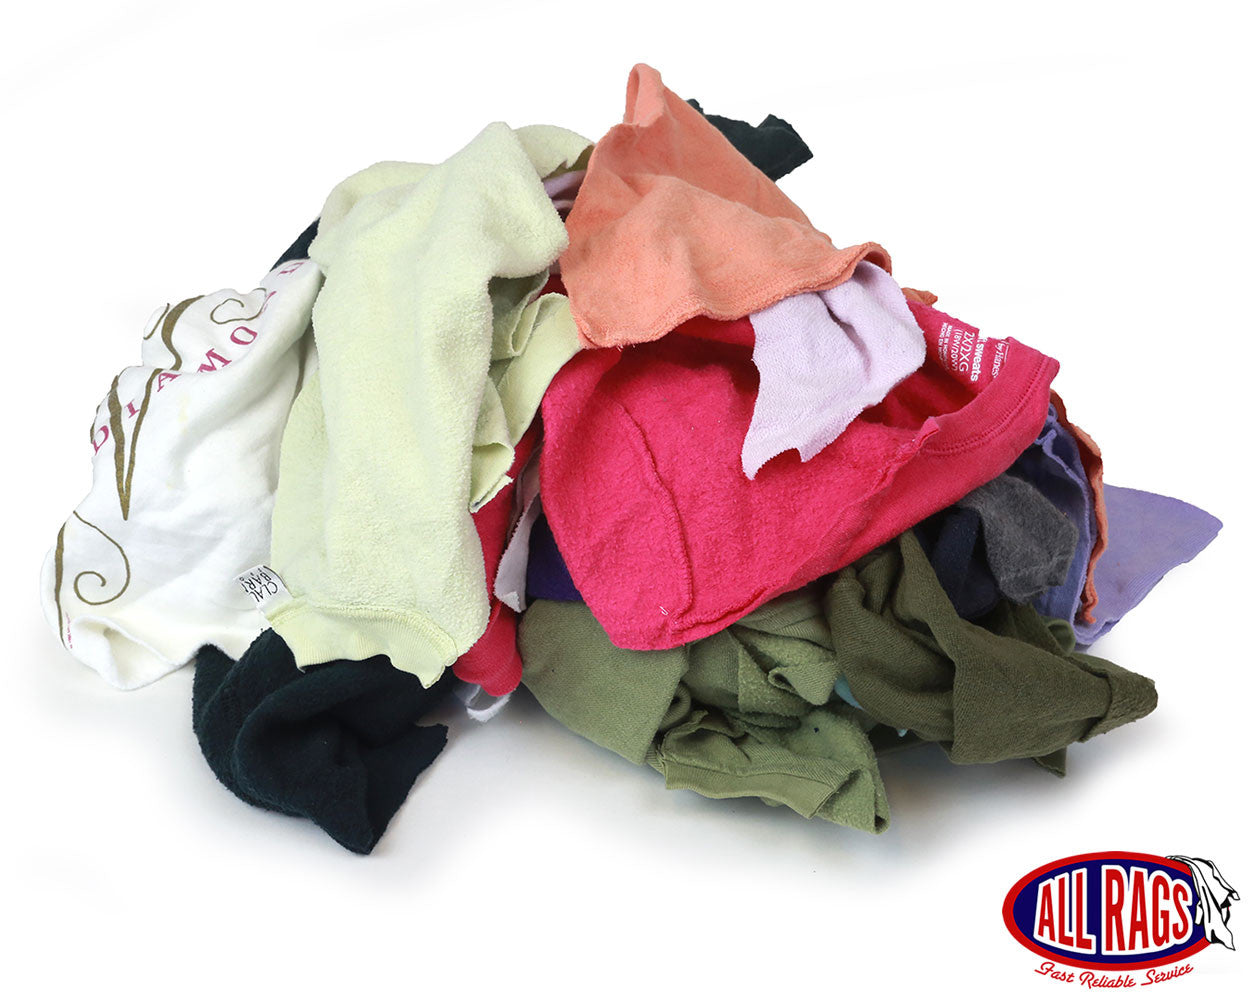 Lint Free Rags- 100% Cotton Rags for Cleaning Rags Cotton Cloth Soft Tshirt  Rags